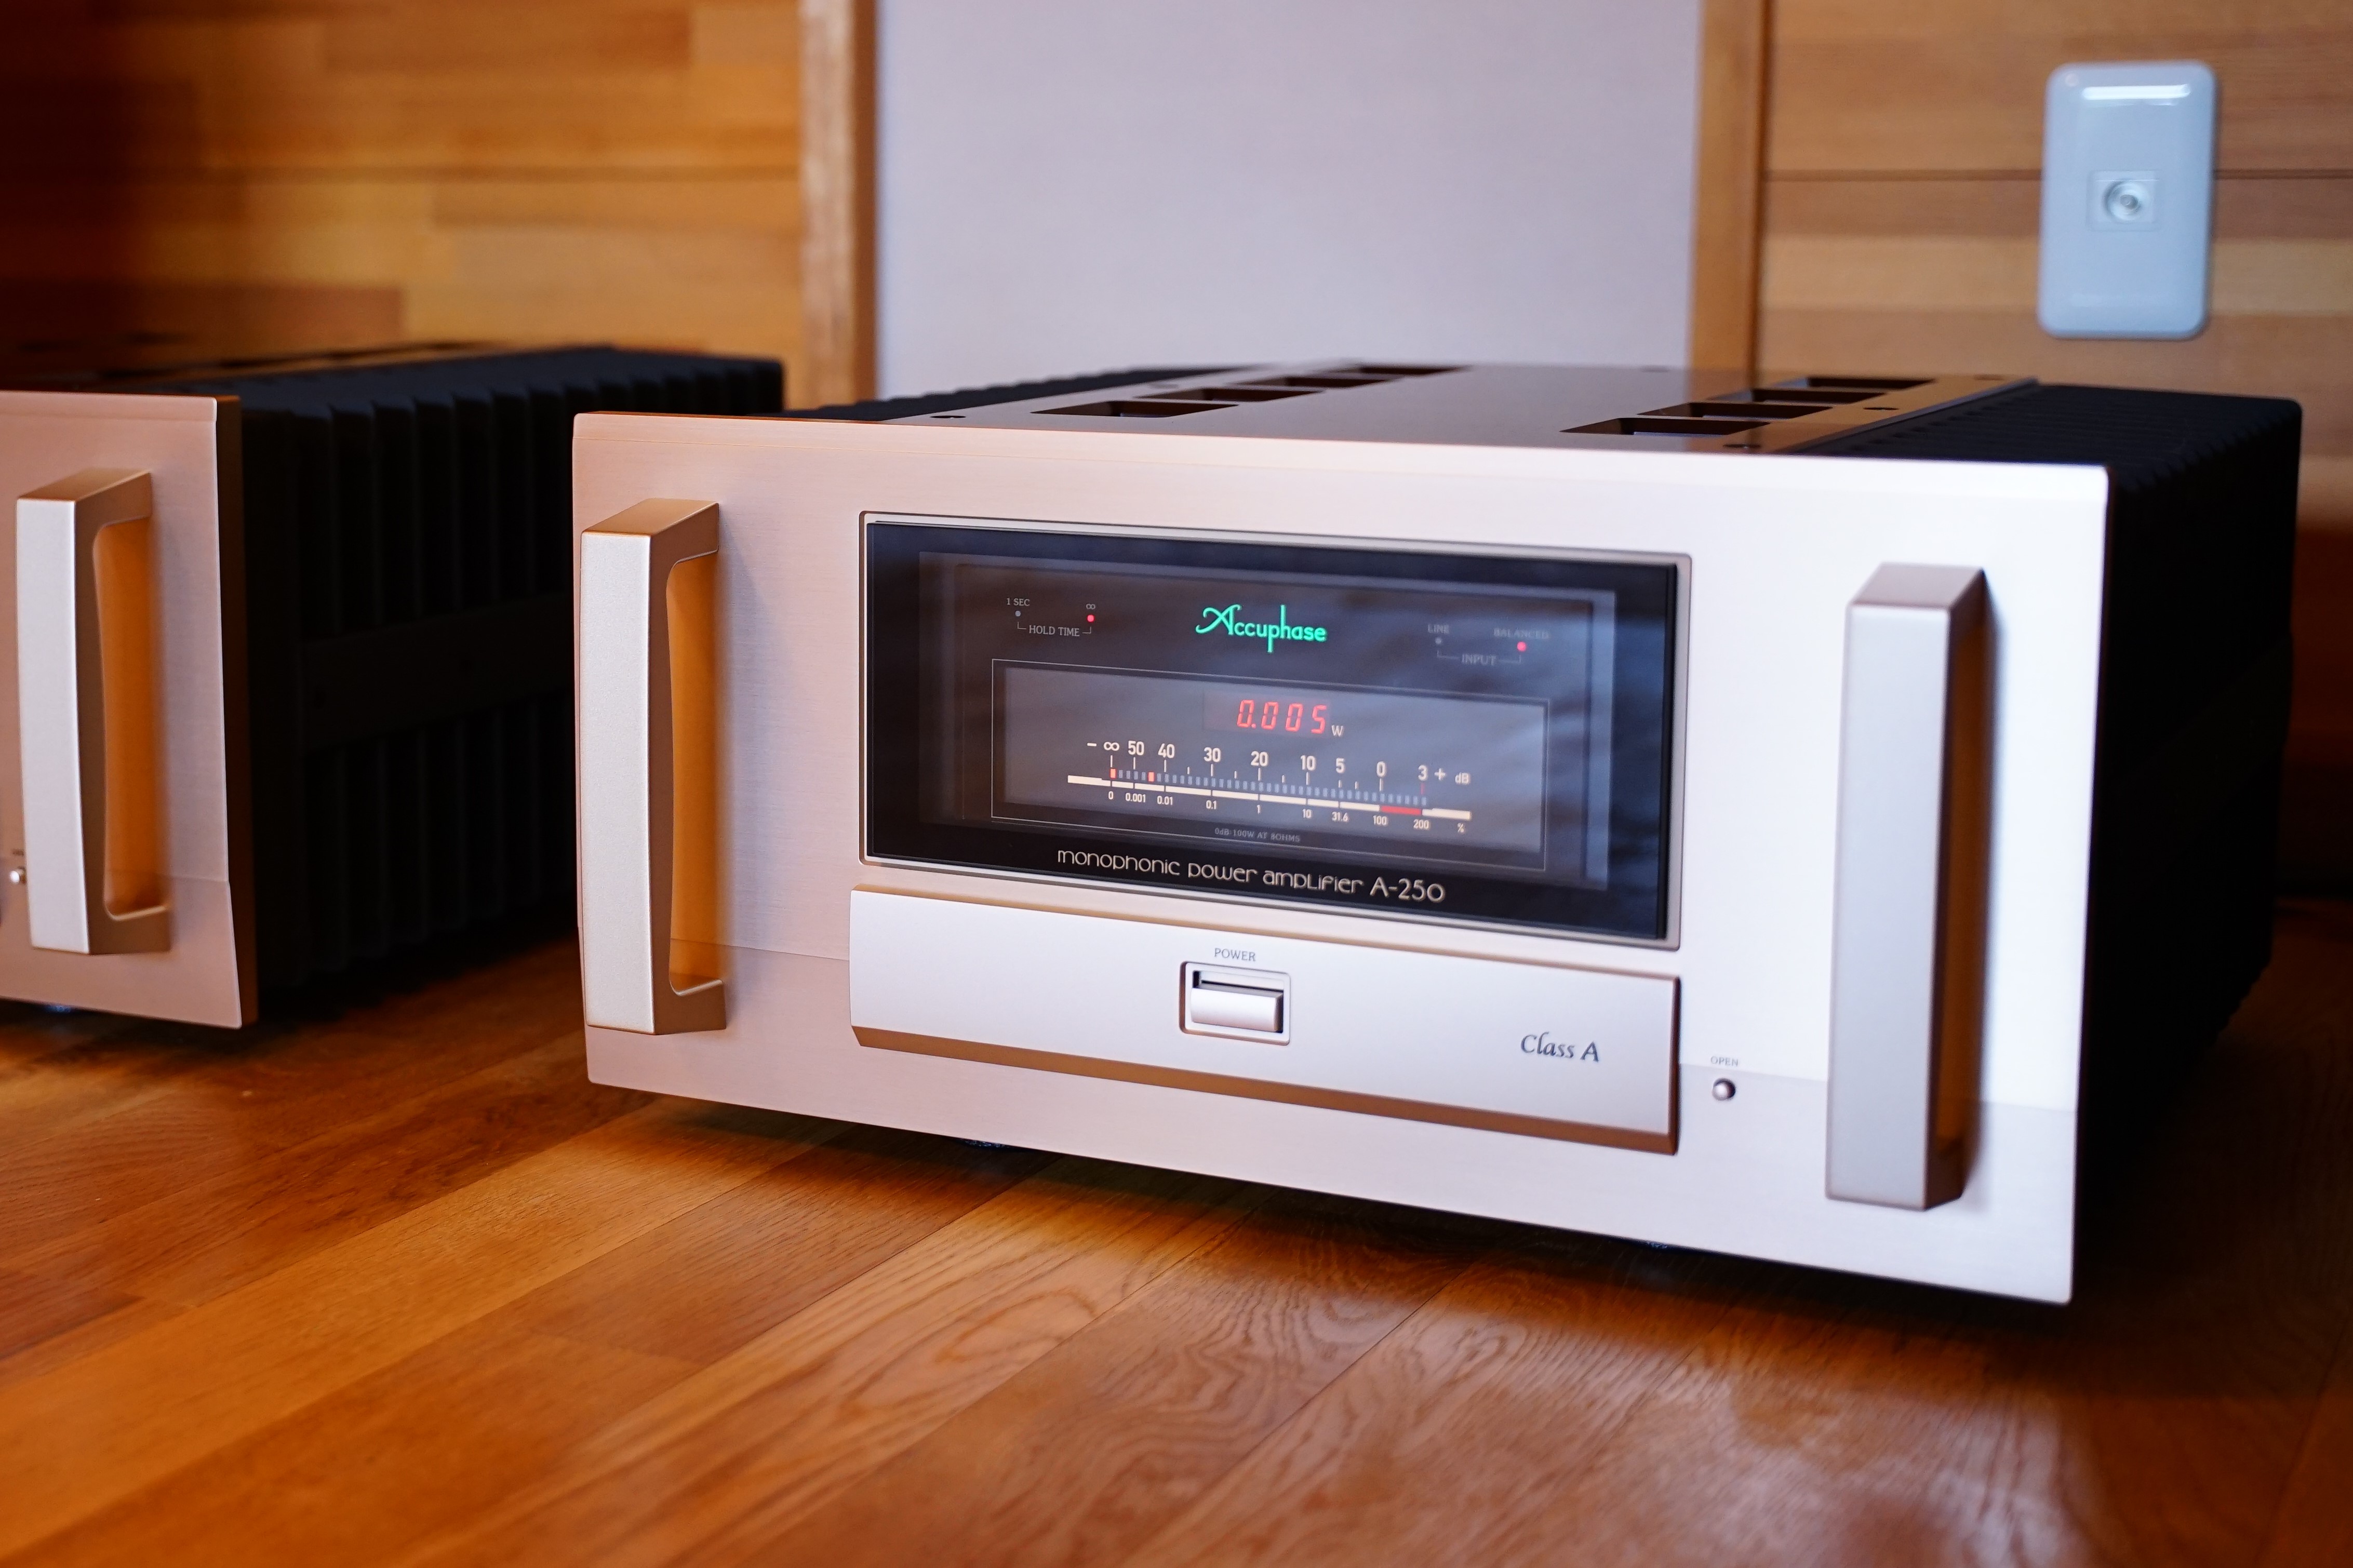 Accuphase 　A-250 山口県　オーディオ　アキュフェーズ　アンプ　パワーアンプ　モノラルパワーアンプ